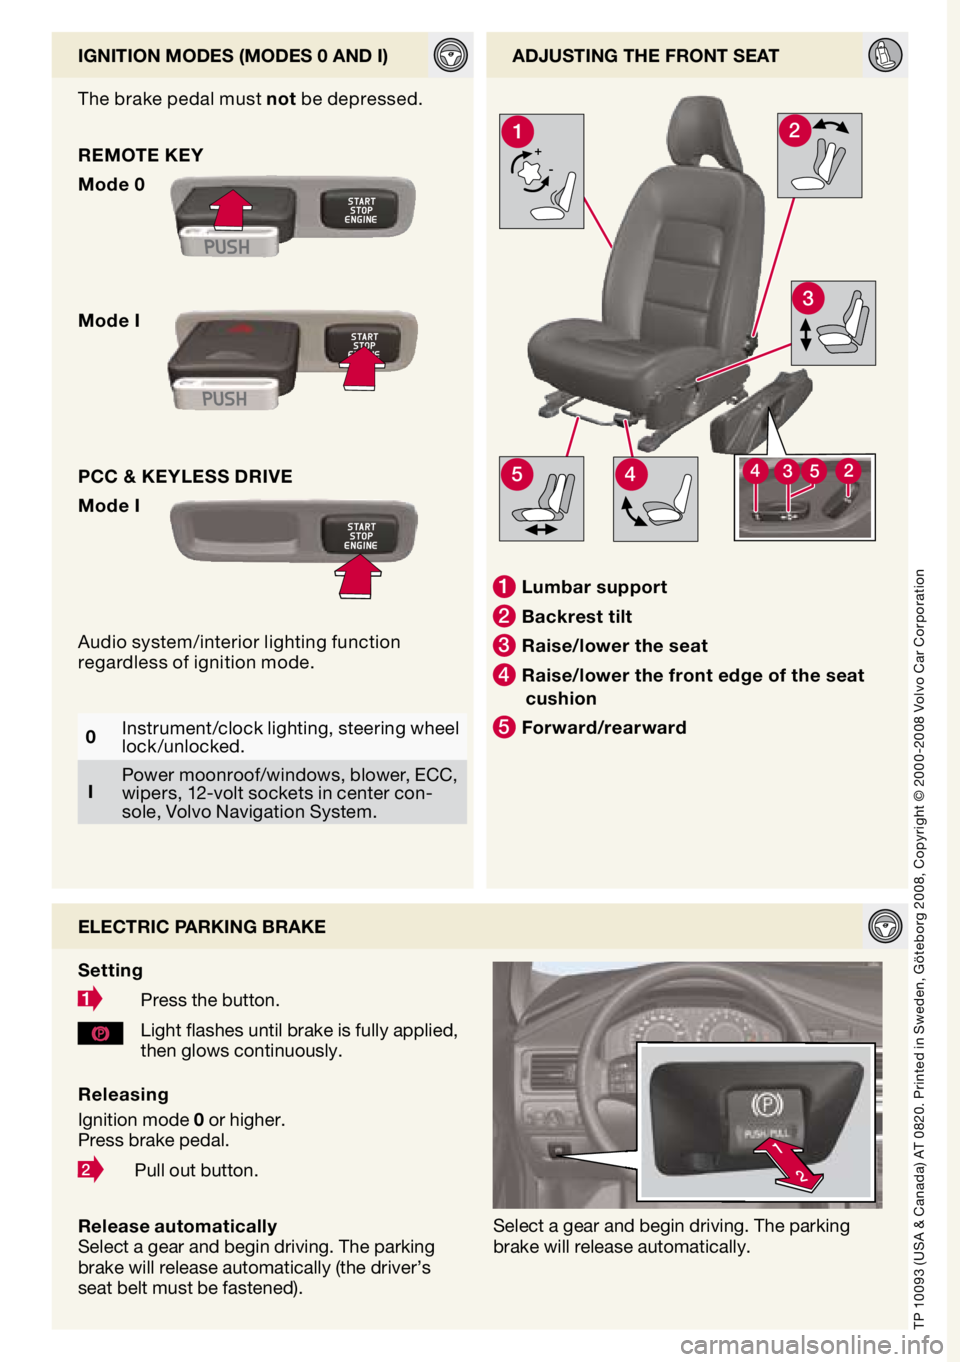 VOLVO V70 2009  Quick Guide 
2
1

+-
3
21
544352

ignition modes (modes 0 And i)AdjUsting the front seAt
electric PArking BrAke
s etting
 
Press the button.
Light flashes until brake is fully applied, then glows continuously.
Se